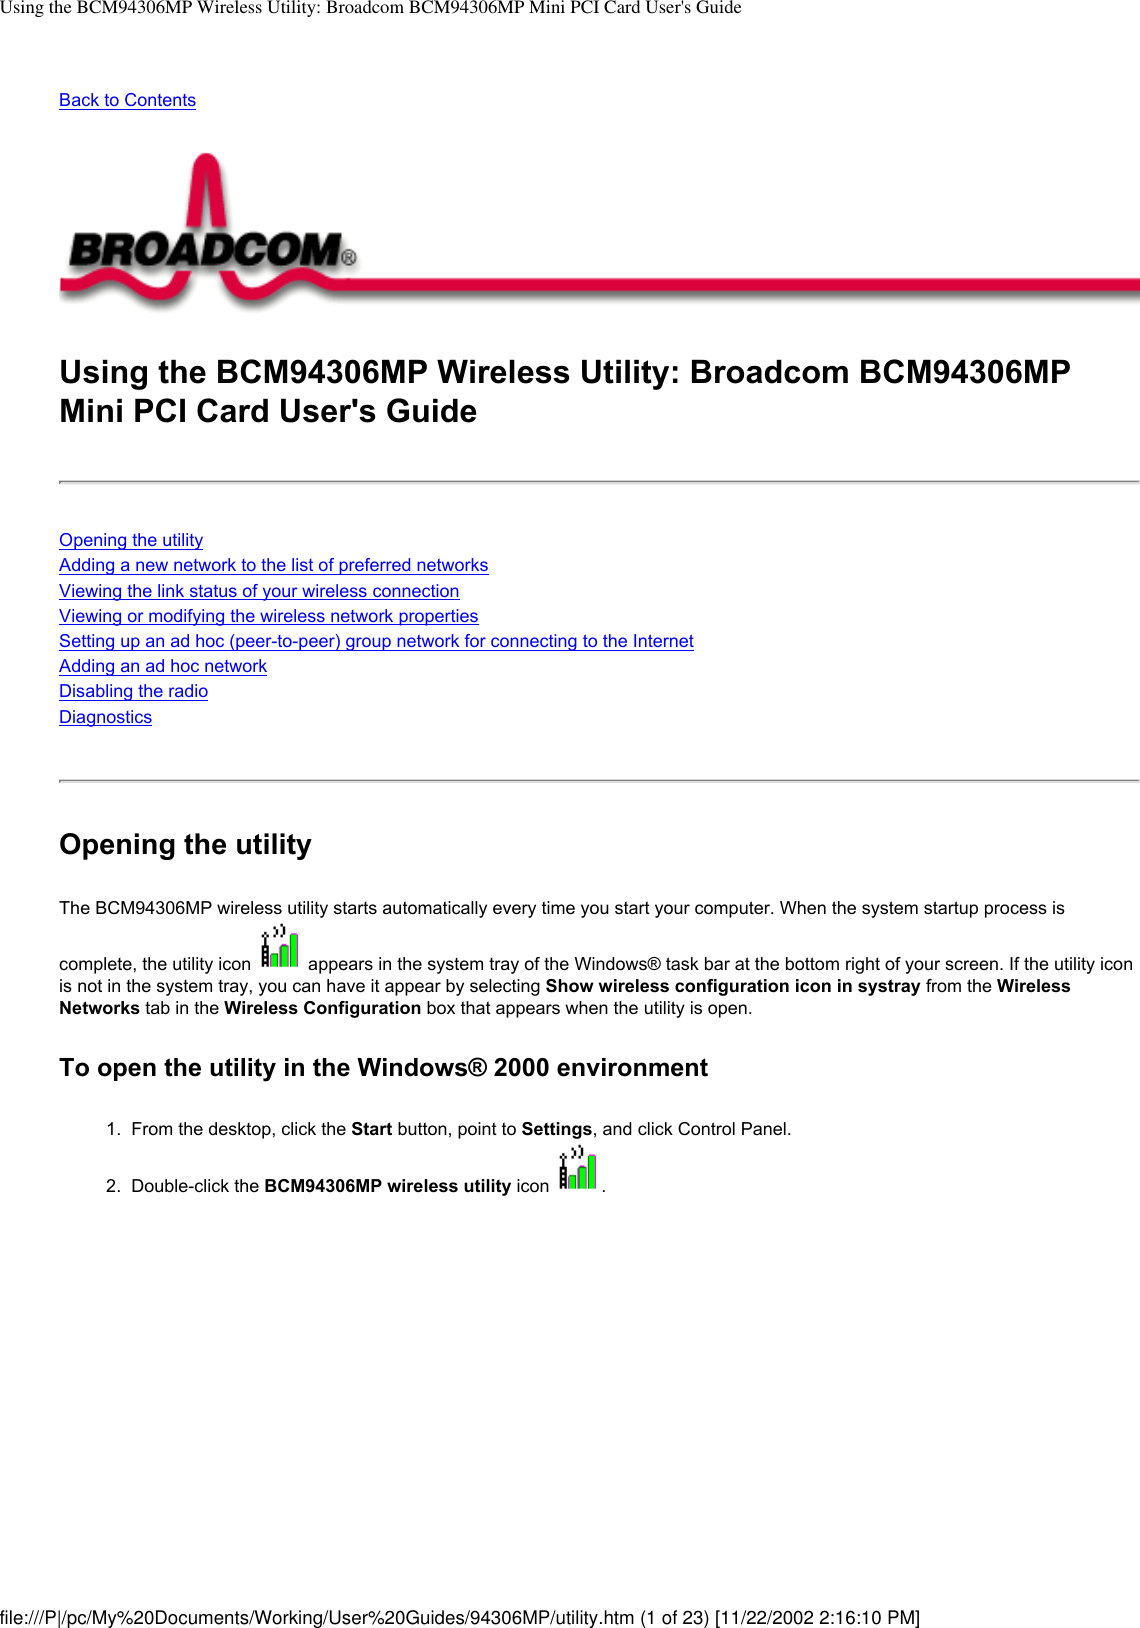 Using the BCM94306MP Wireless Utility: Broadcom BCM94306MP Mini PCI Card User&apos;s GuideBack to ContentsUsing the BCM94306MP Wireless Utility: Broadcom BCM94306MP Mini PCI Card User&apos;s GuideOpening the utilityAdding a new network to the list of preferred networksViewing the link status of your wireless connectionViewing or modifying the wireless network propertiesSetting up an ad hoc (peer-to-peer) group network for connecting to the InternetAdding an ad hoc networkDisabling the radioDiagnosticsOpening the utilityThe BCM94306MP wireless utility starts automatically every time you start your computer. When the system startup process is complete, the utility icon   appears in the system tray of the Windows® task bar at the bottom right of your screen. If the utility icon is not in the system tray, you can have it appear by selecting Show wireless configuration icon in systray from the Wireless Networks tab in the Wireless Configuration box that appears when the utility is open.To open the utility in the Windows® 2000 environment1.  From the desktop, click the Start button, point to Settings, and click Control Panel.2.  Double-click the BCM94306MP wireless utility icon  . file:///P|/pc/My%20Documents/Working/User%20Guides/94306MP/utility.htm (1 of 23) [11/22/2002 2:16:10 PM]